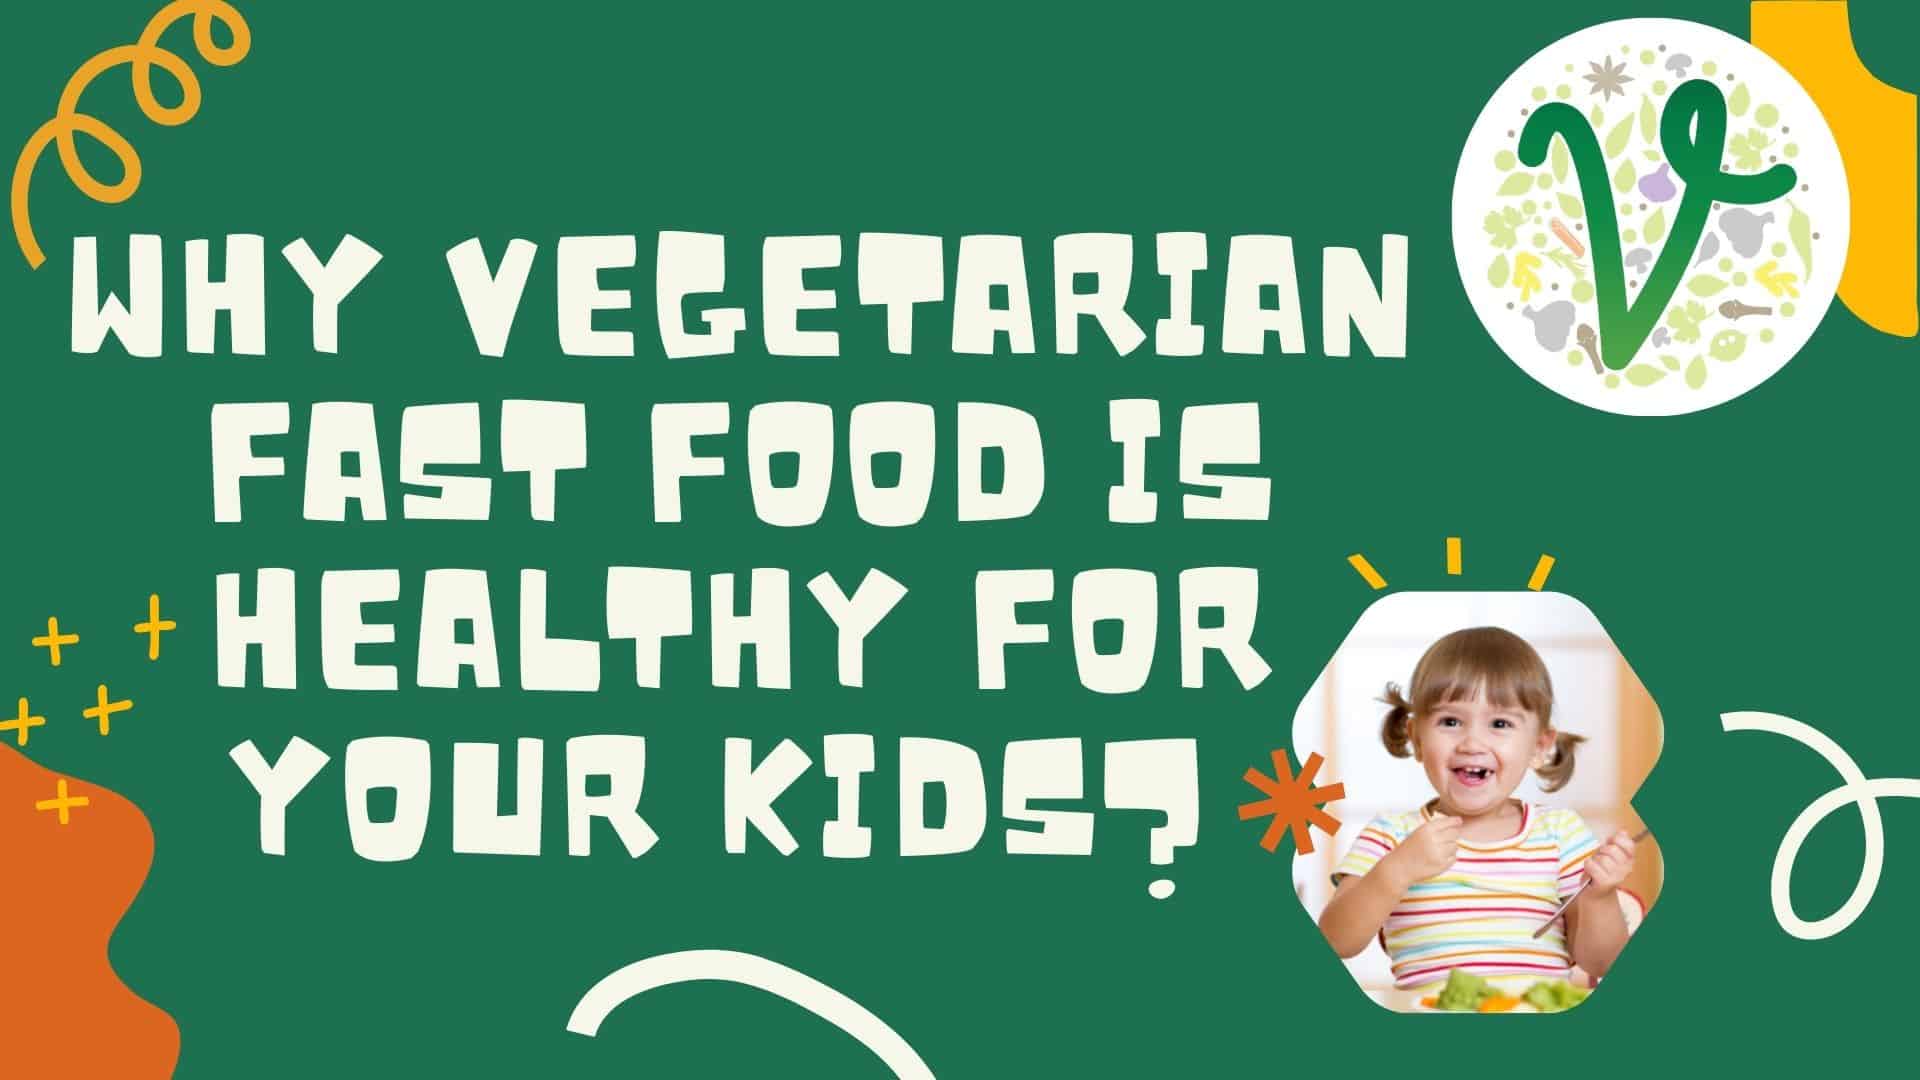 Why Vegetarian Fast Food Is Healthy for Your Kids?